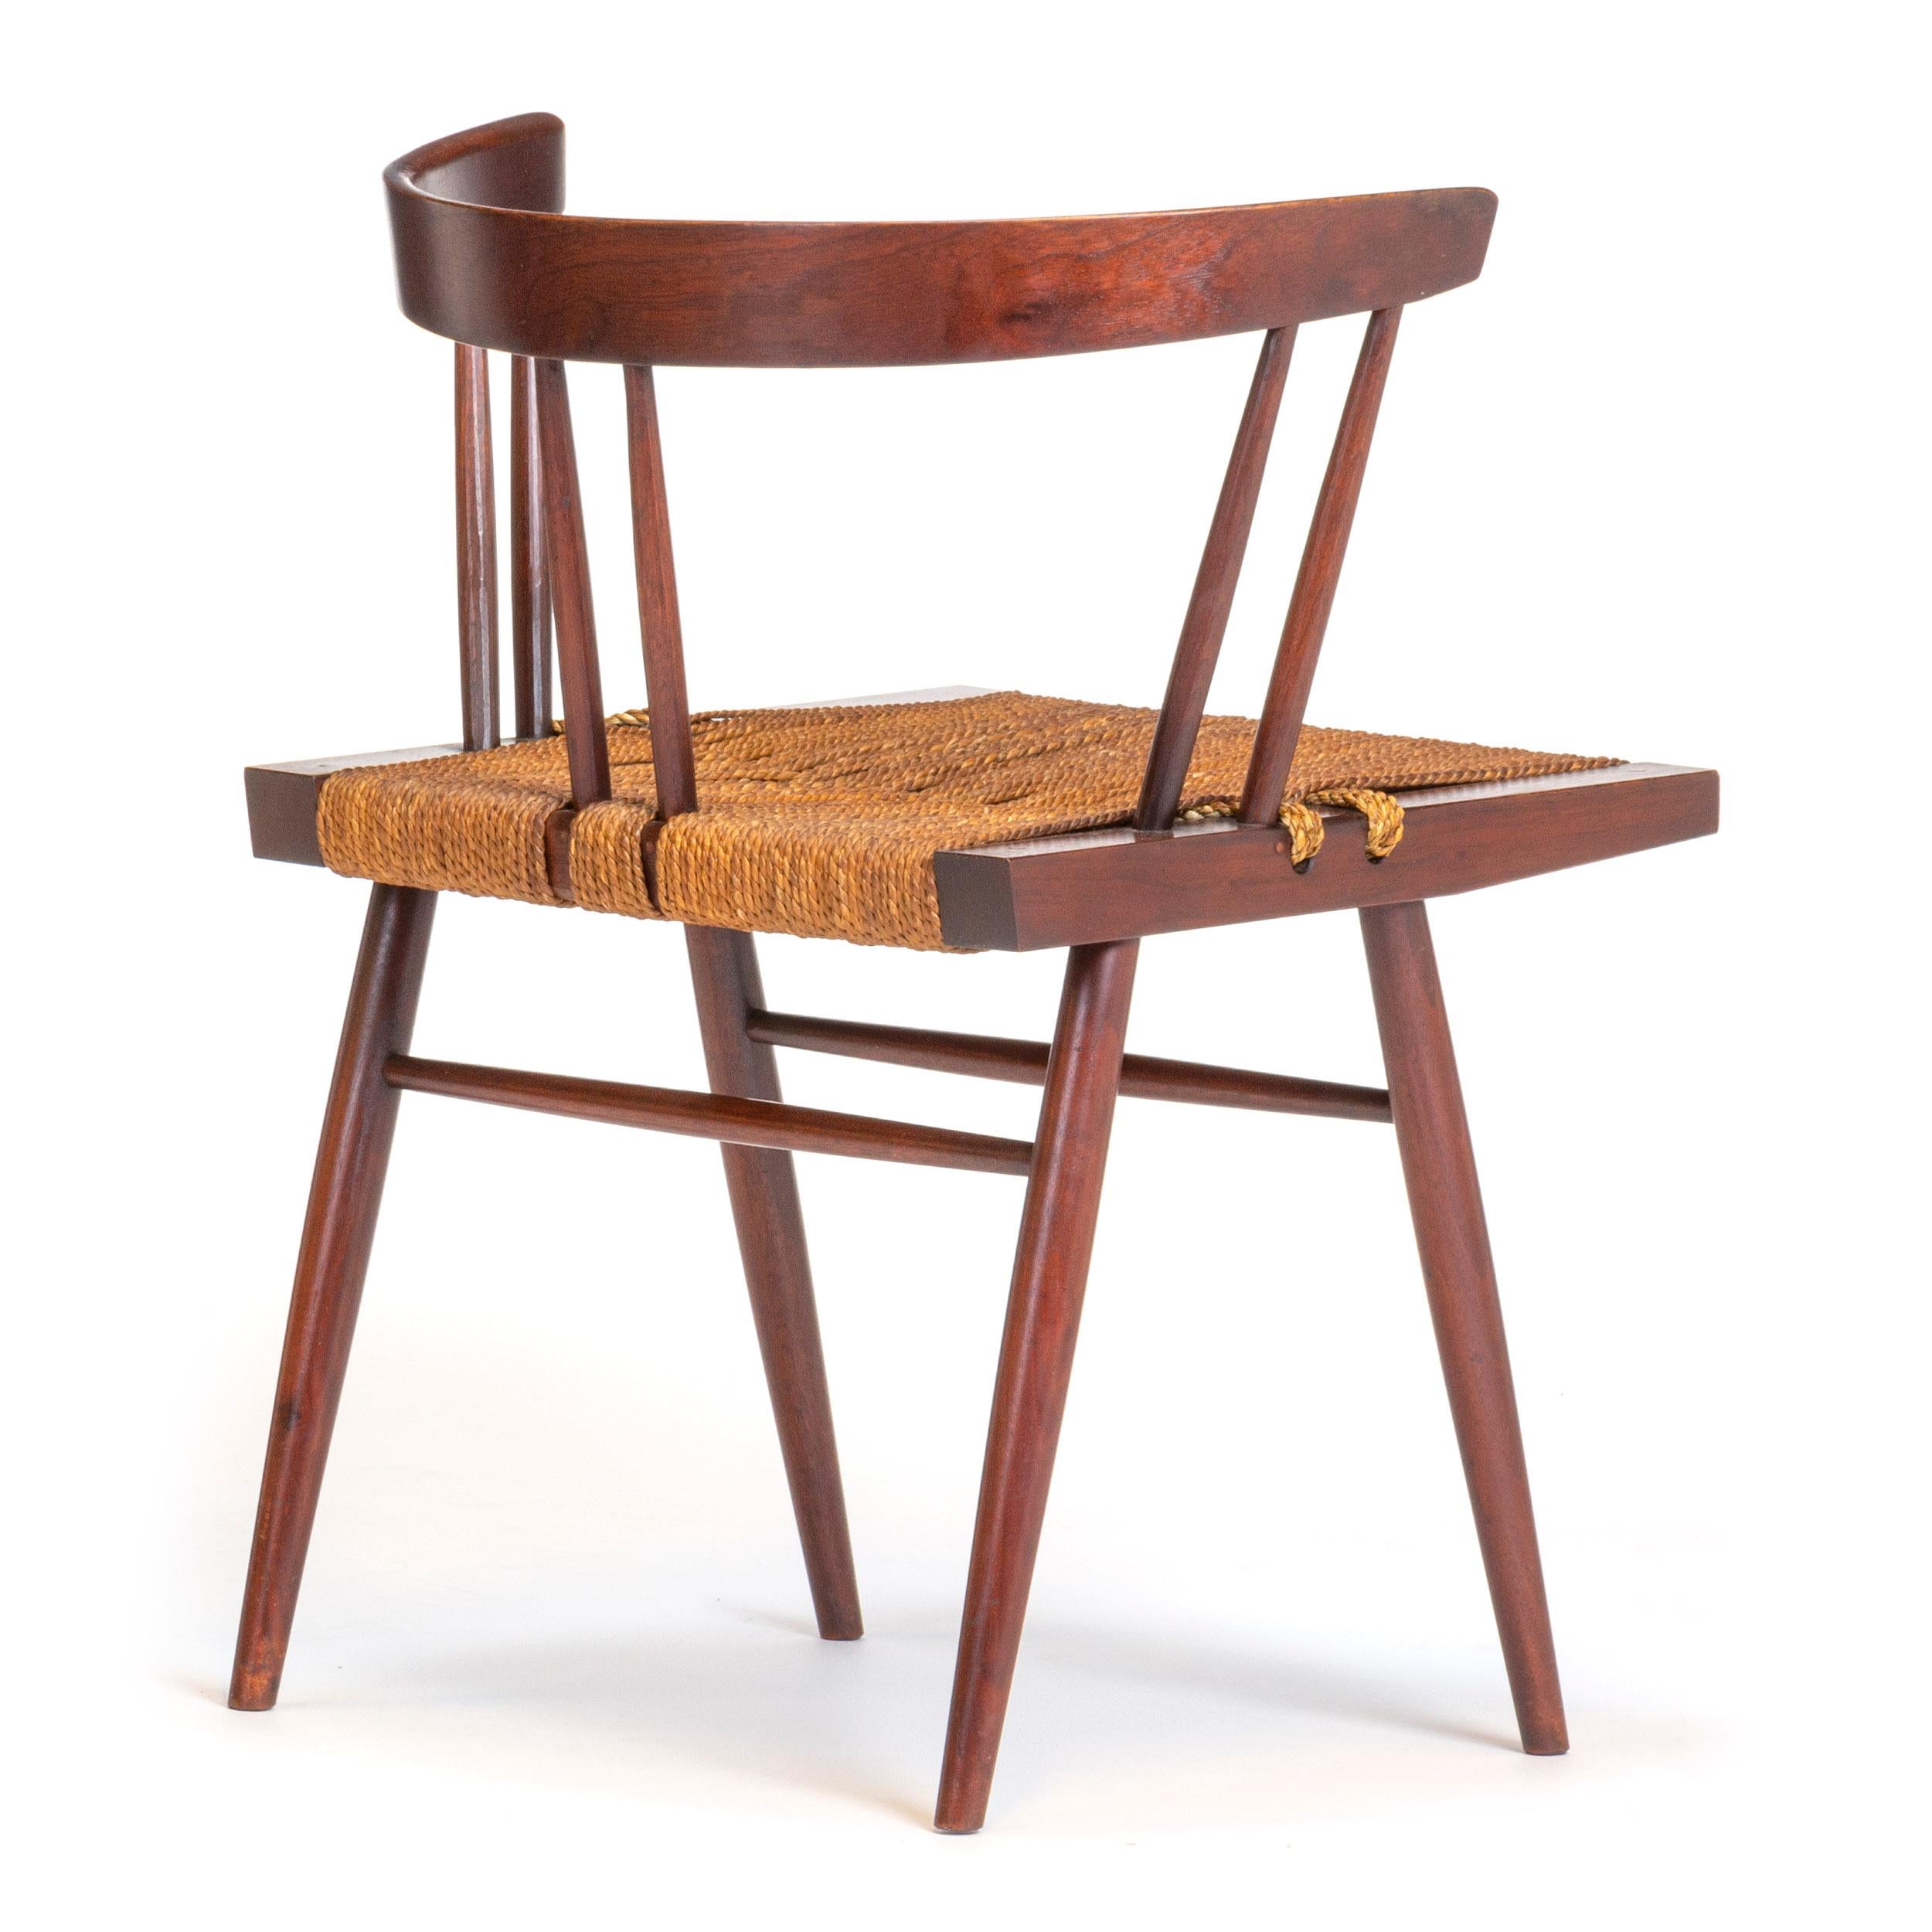 American Craftsman Walnut Dining Chair or Side Chair by George Nakashima